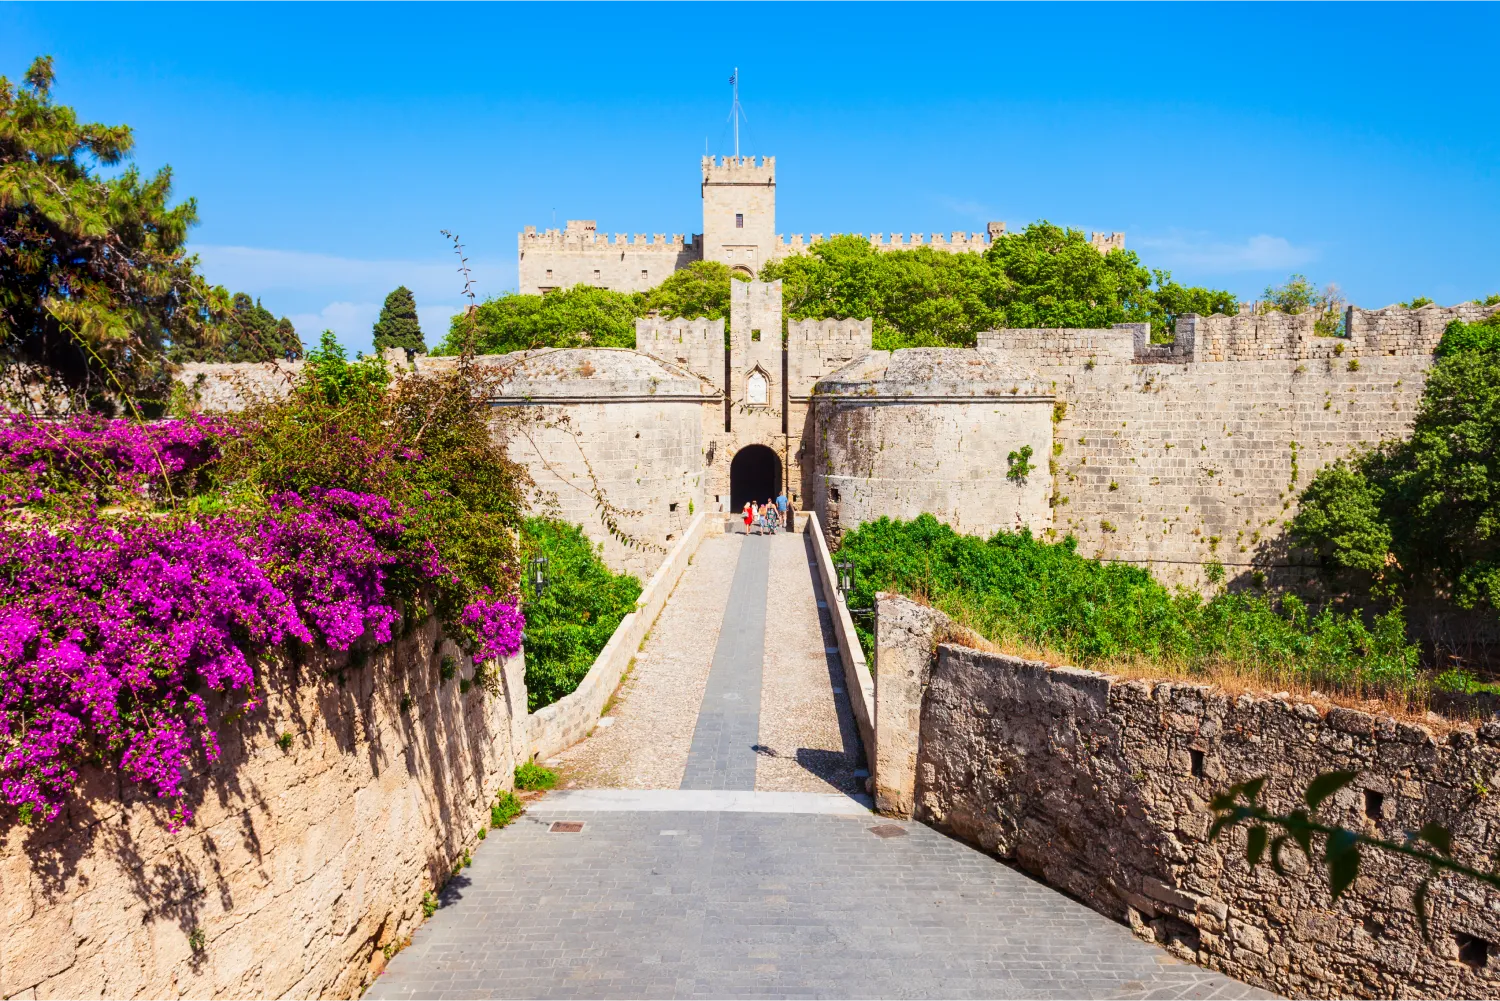 The way to the dominating castle of Rhodes with flowers and lush vegetation around